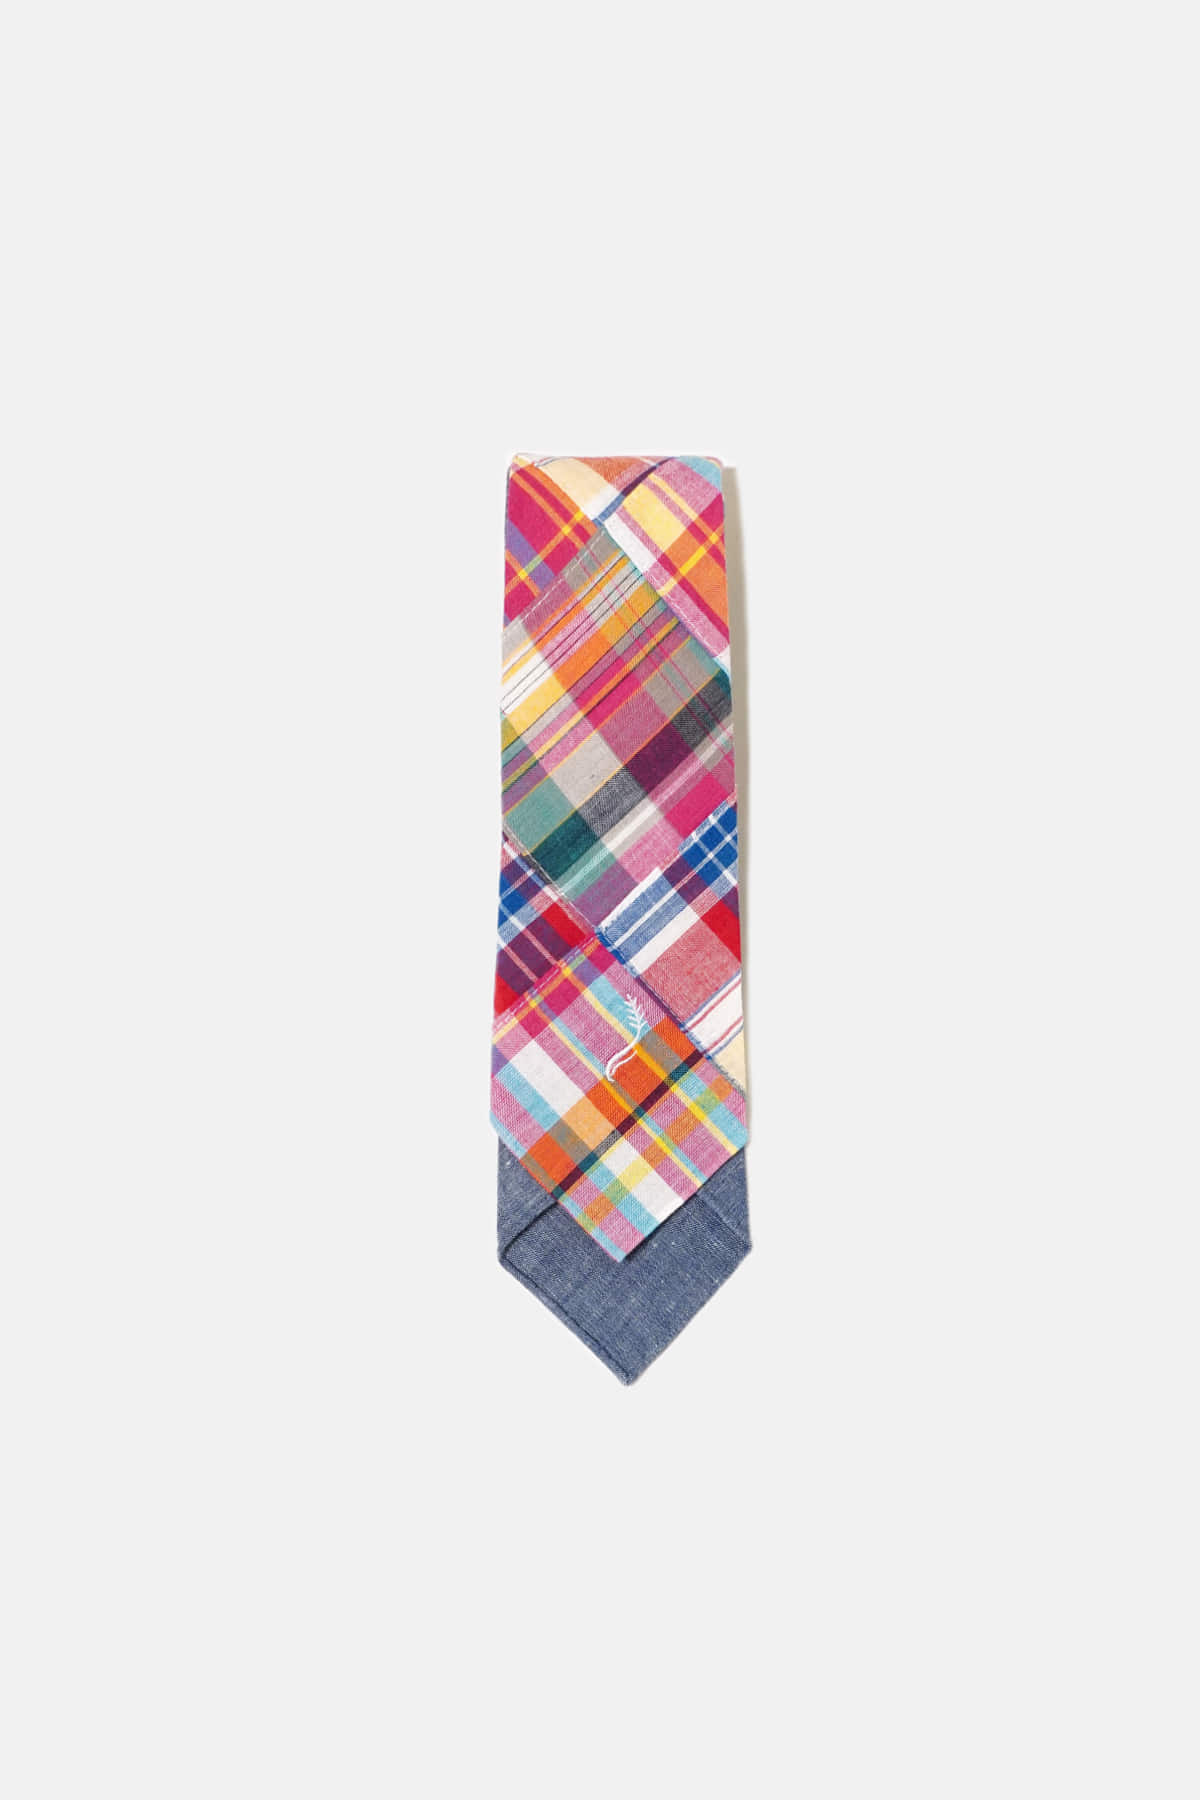 [KENNETH FIELD] 2 Face Tie - Patch Madras Pink